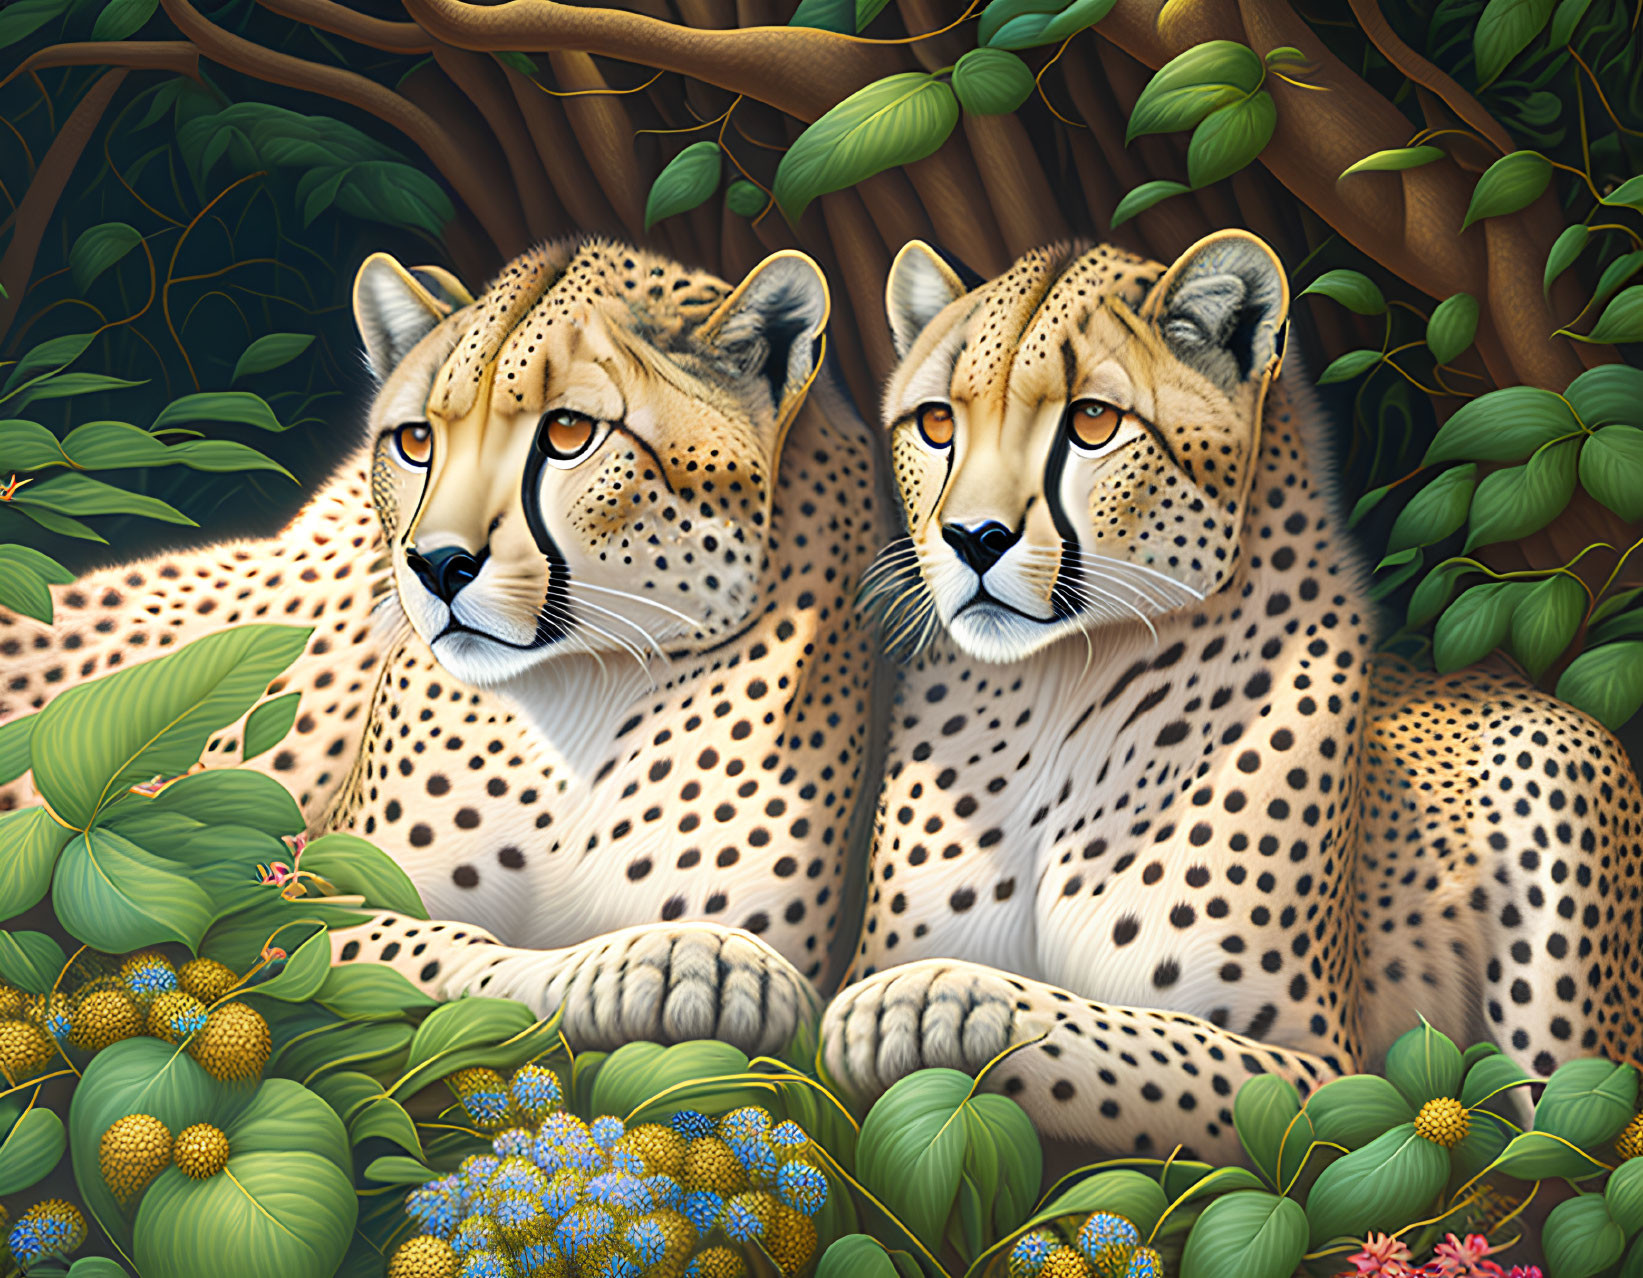 Two Cheetahs Resting in Lush Foliage with Blue and Yellow Flowers